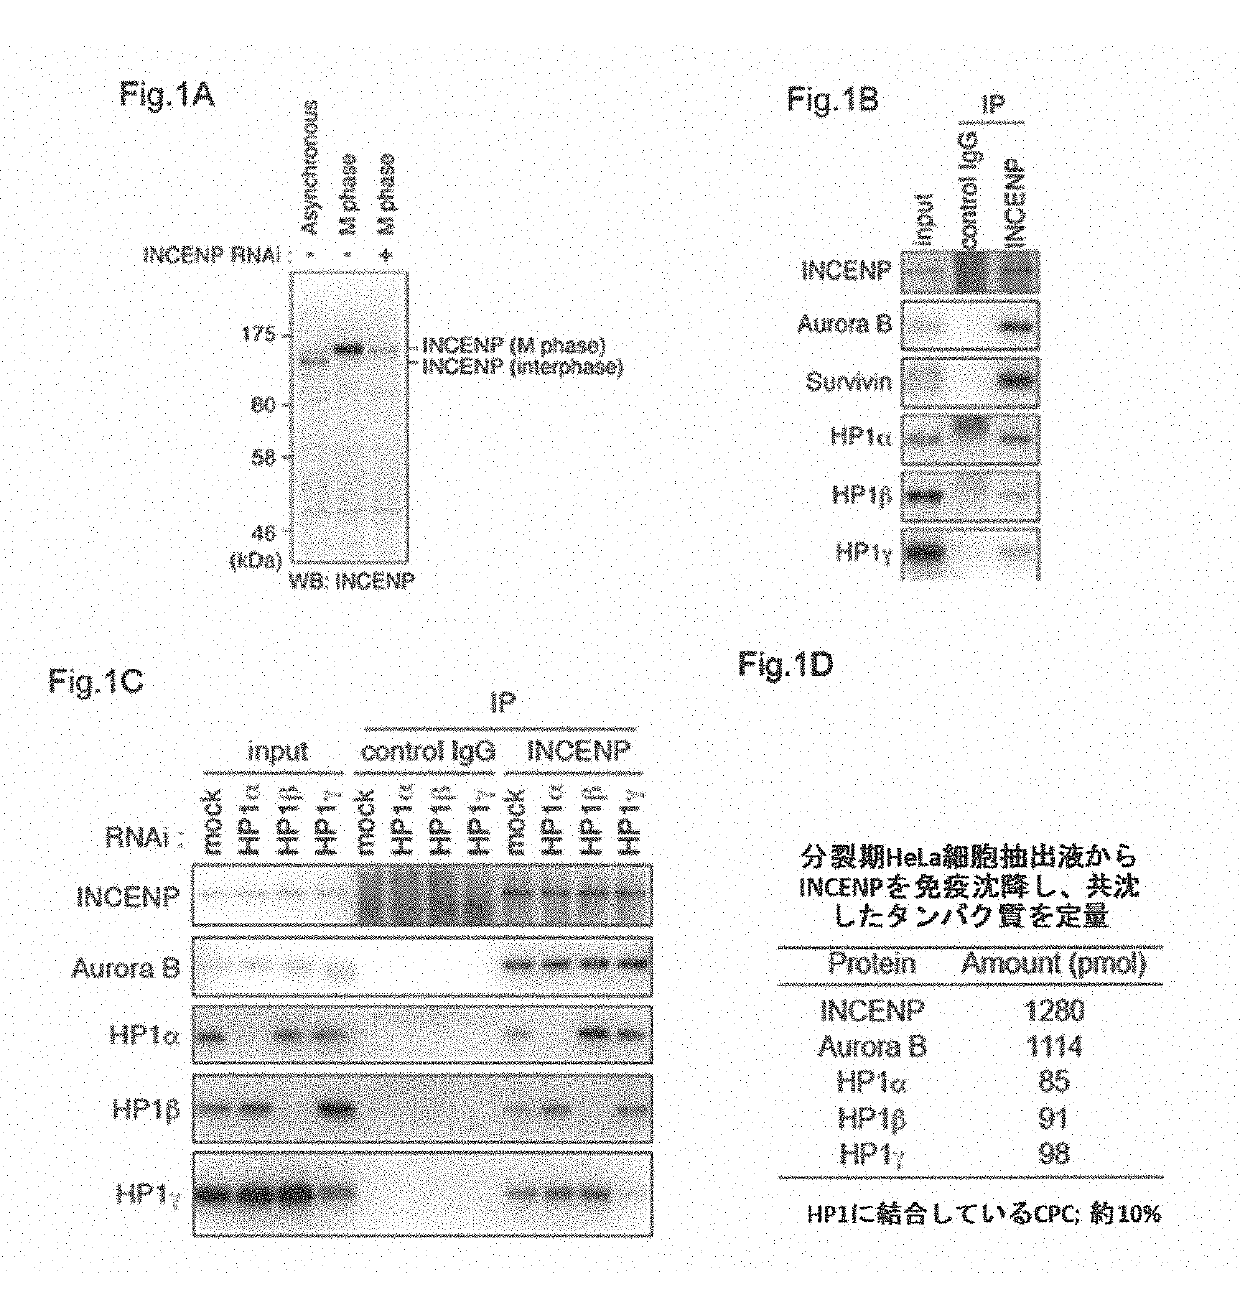 Screening method of anticancer agent focused on function of hp1 and evaluation system